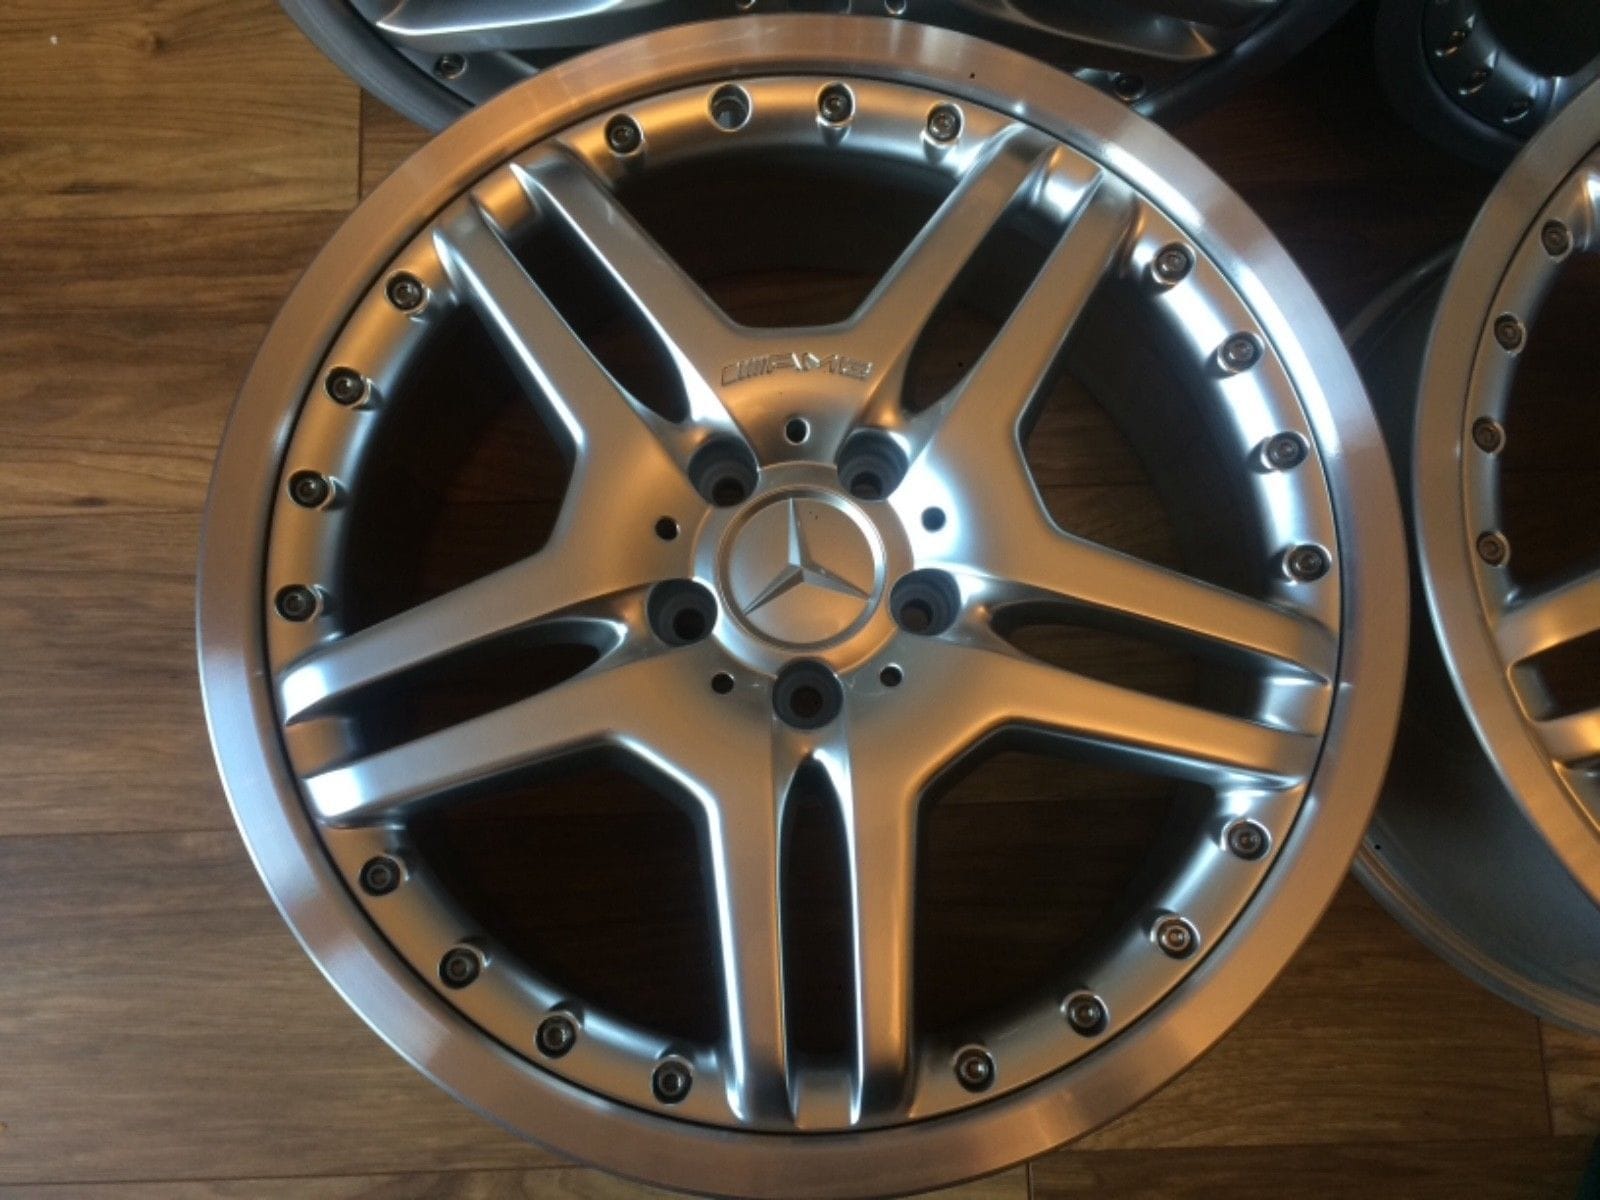 Wheels and Tires/Axles - Wanted - excellent condition 19" AMG 2 piece split 5 wheels. - New or Used - San Francisco, CA 94710, United States